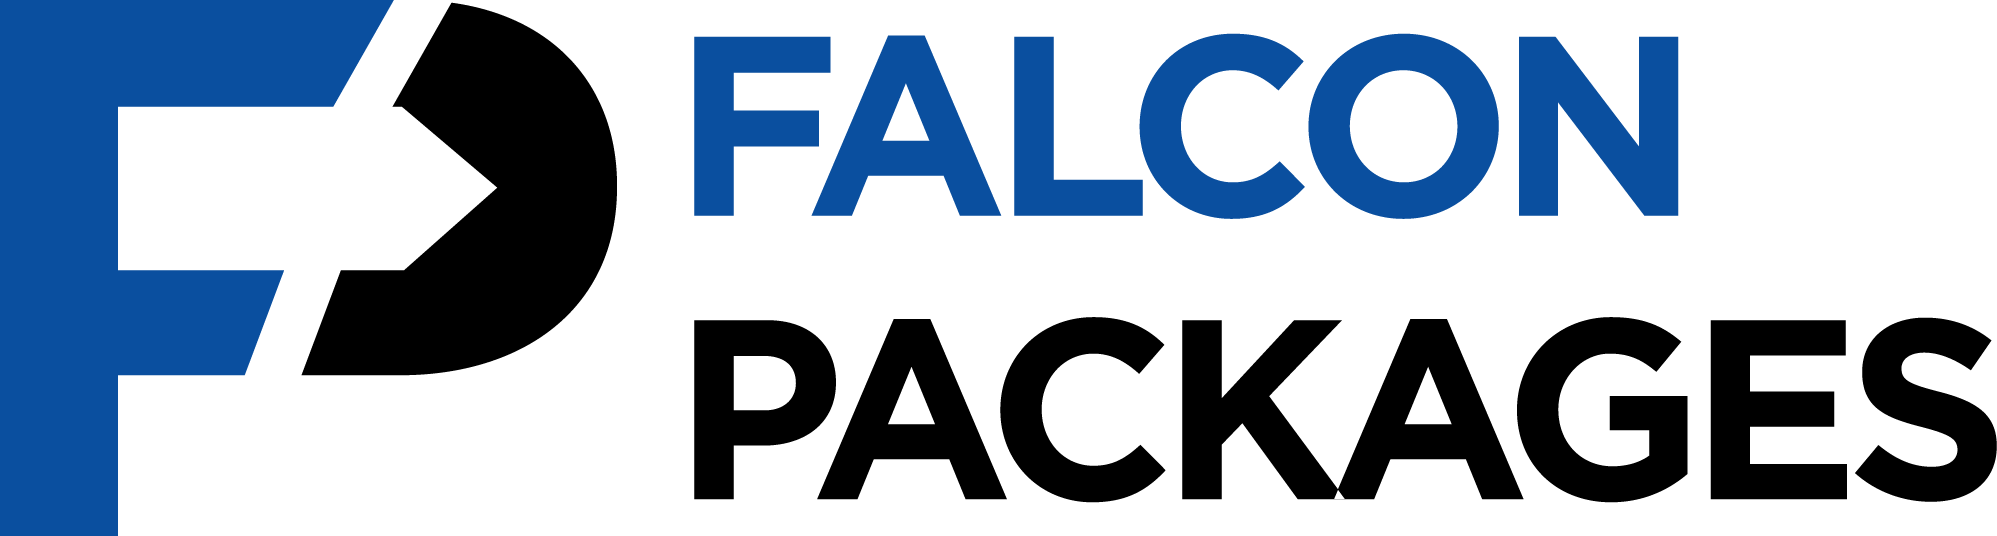 Falcon Packages